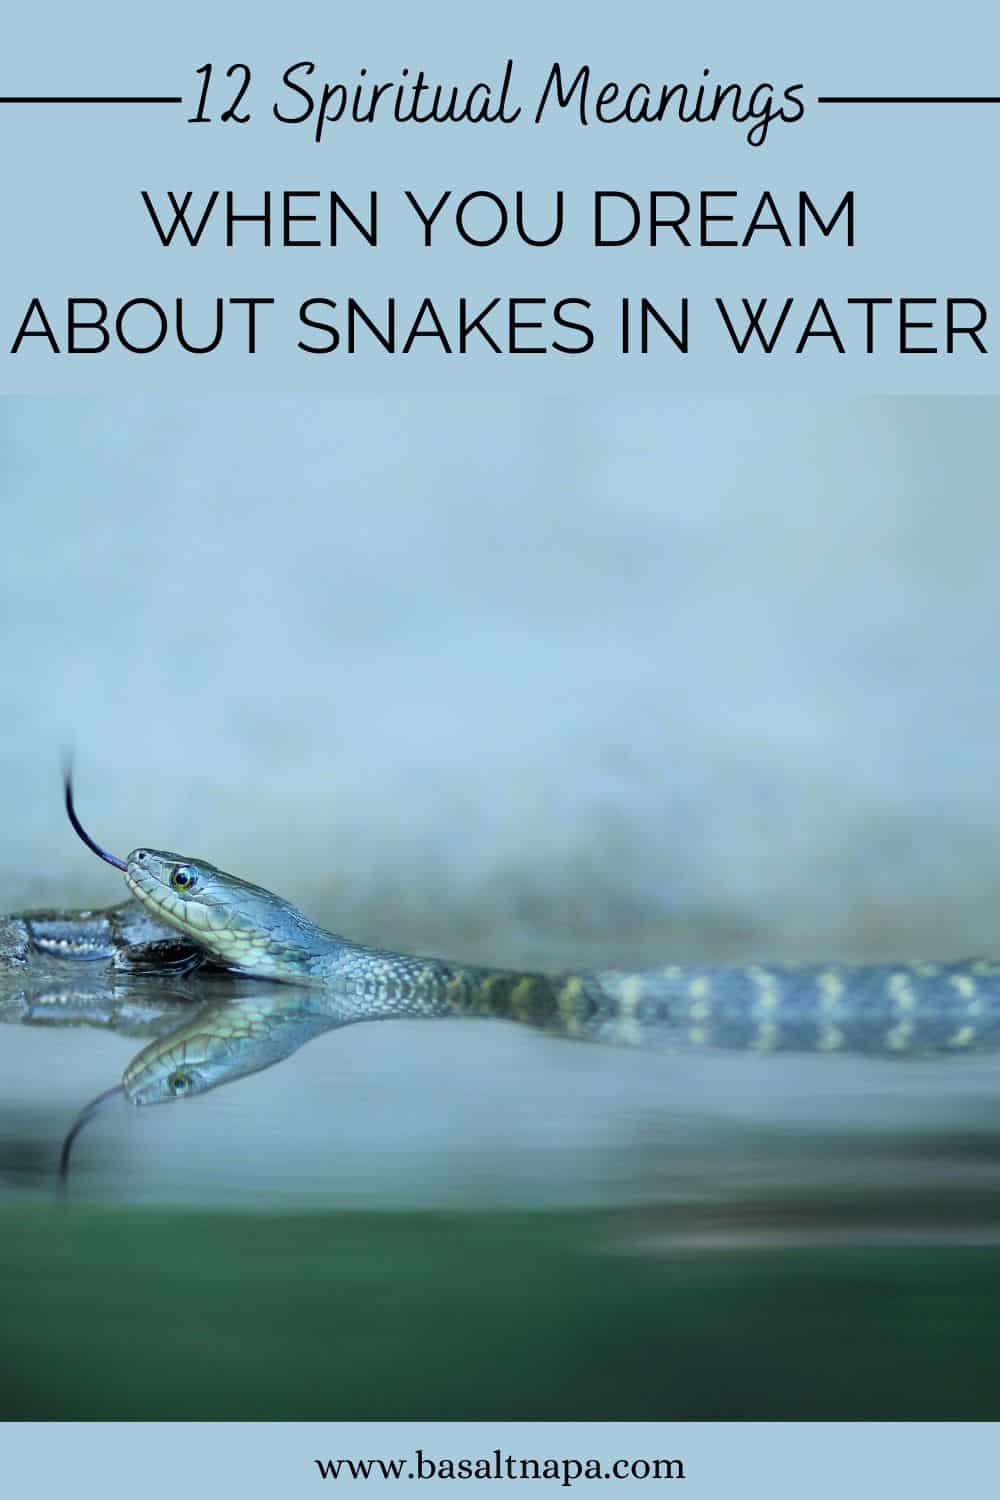 What does a dream about snakes in water mean